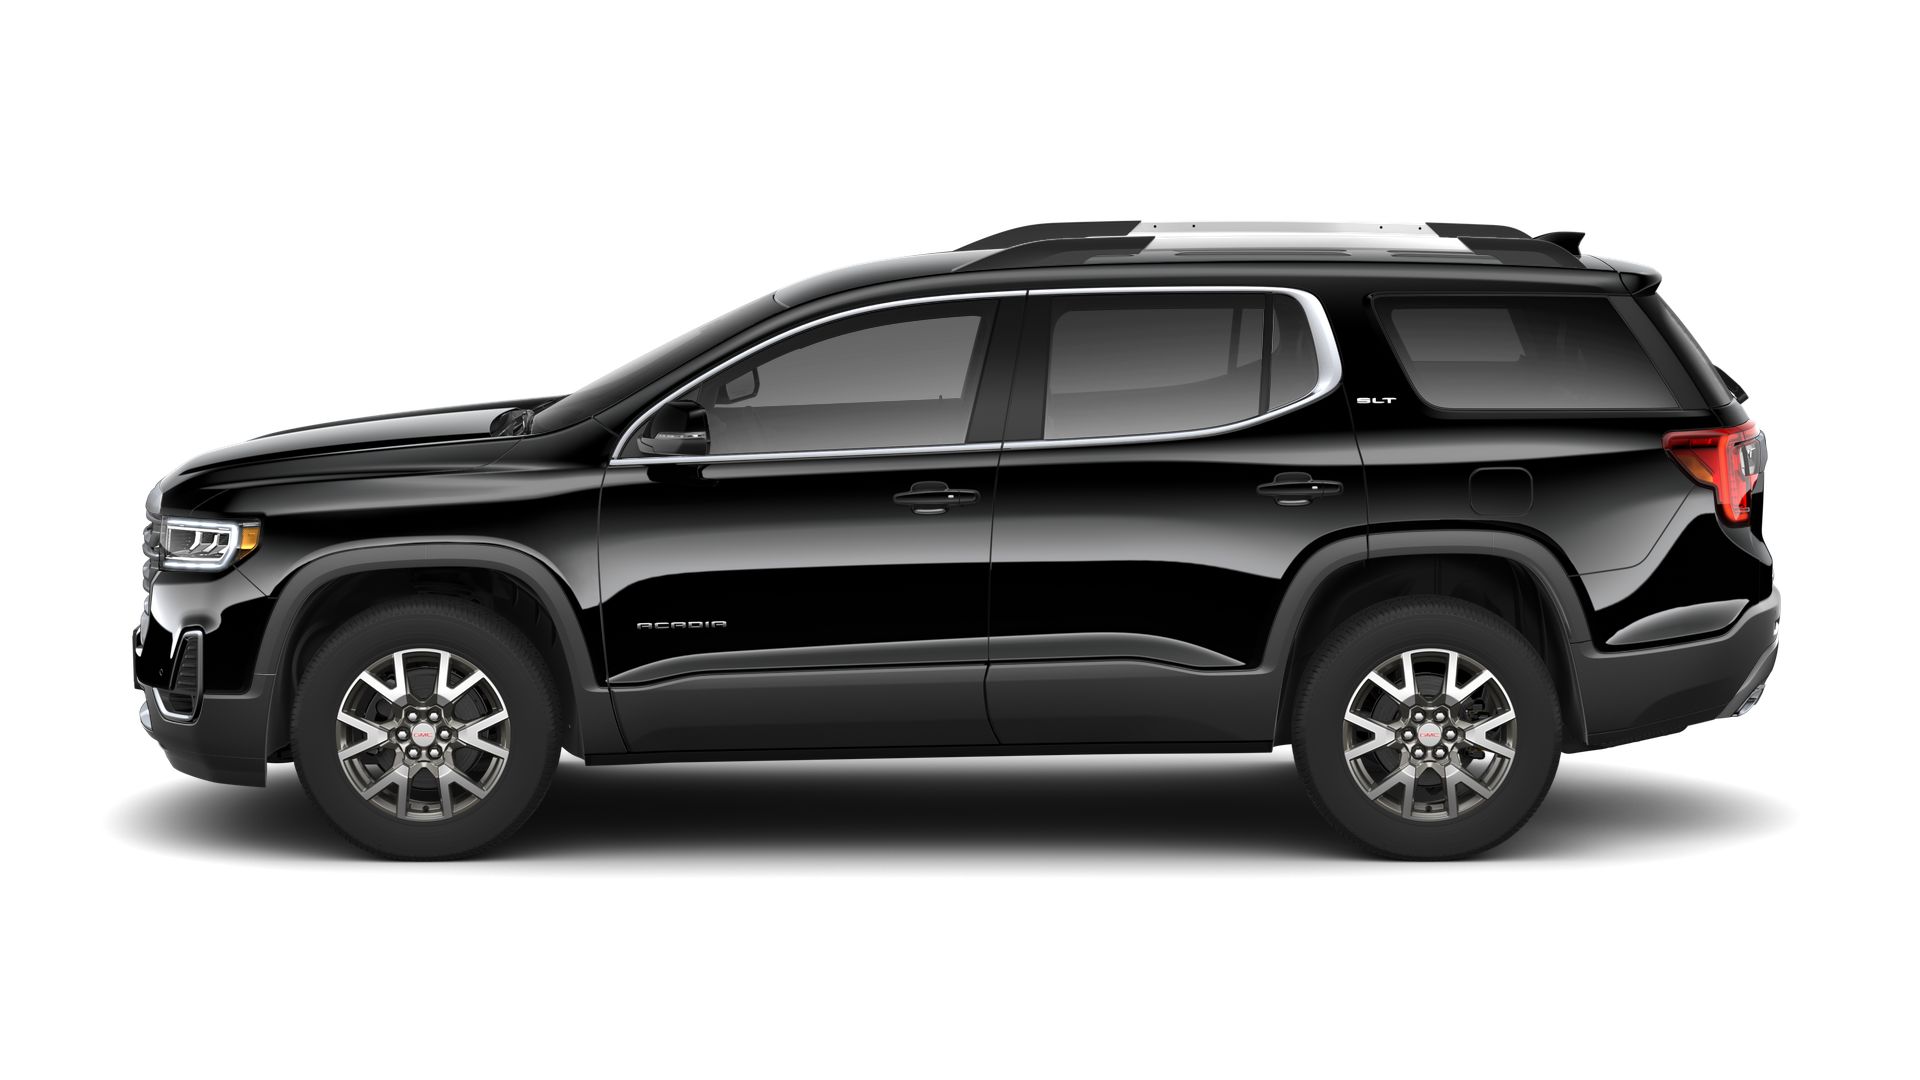 2023 GMC Acadia for Sale or Lease